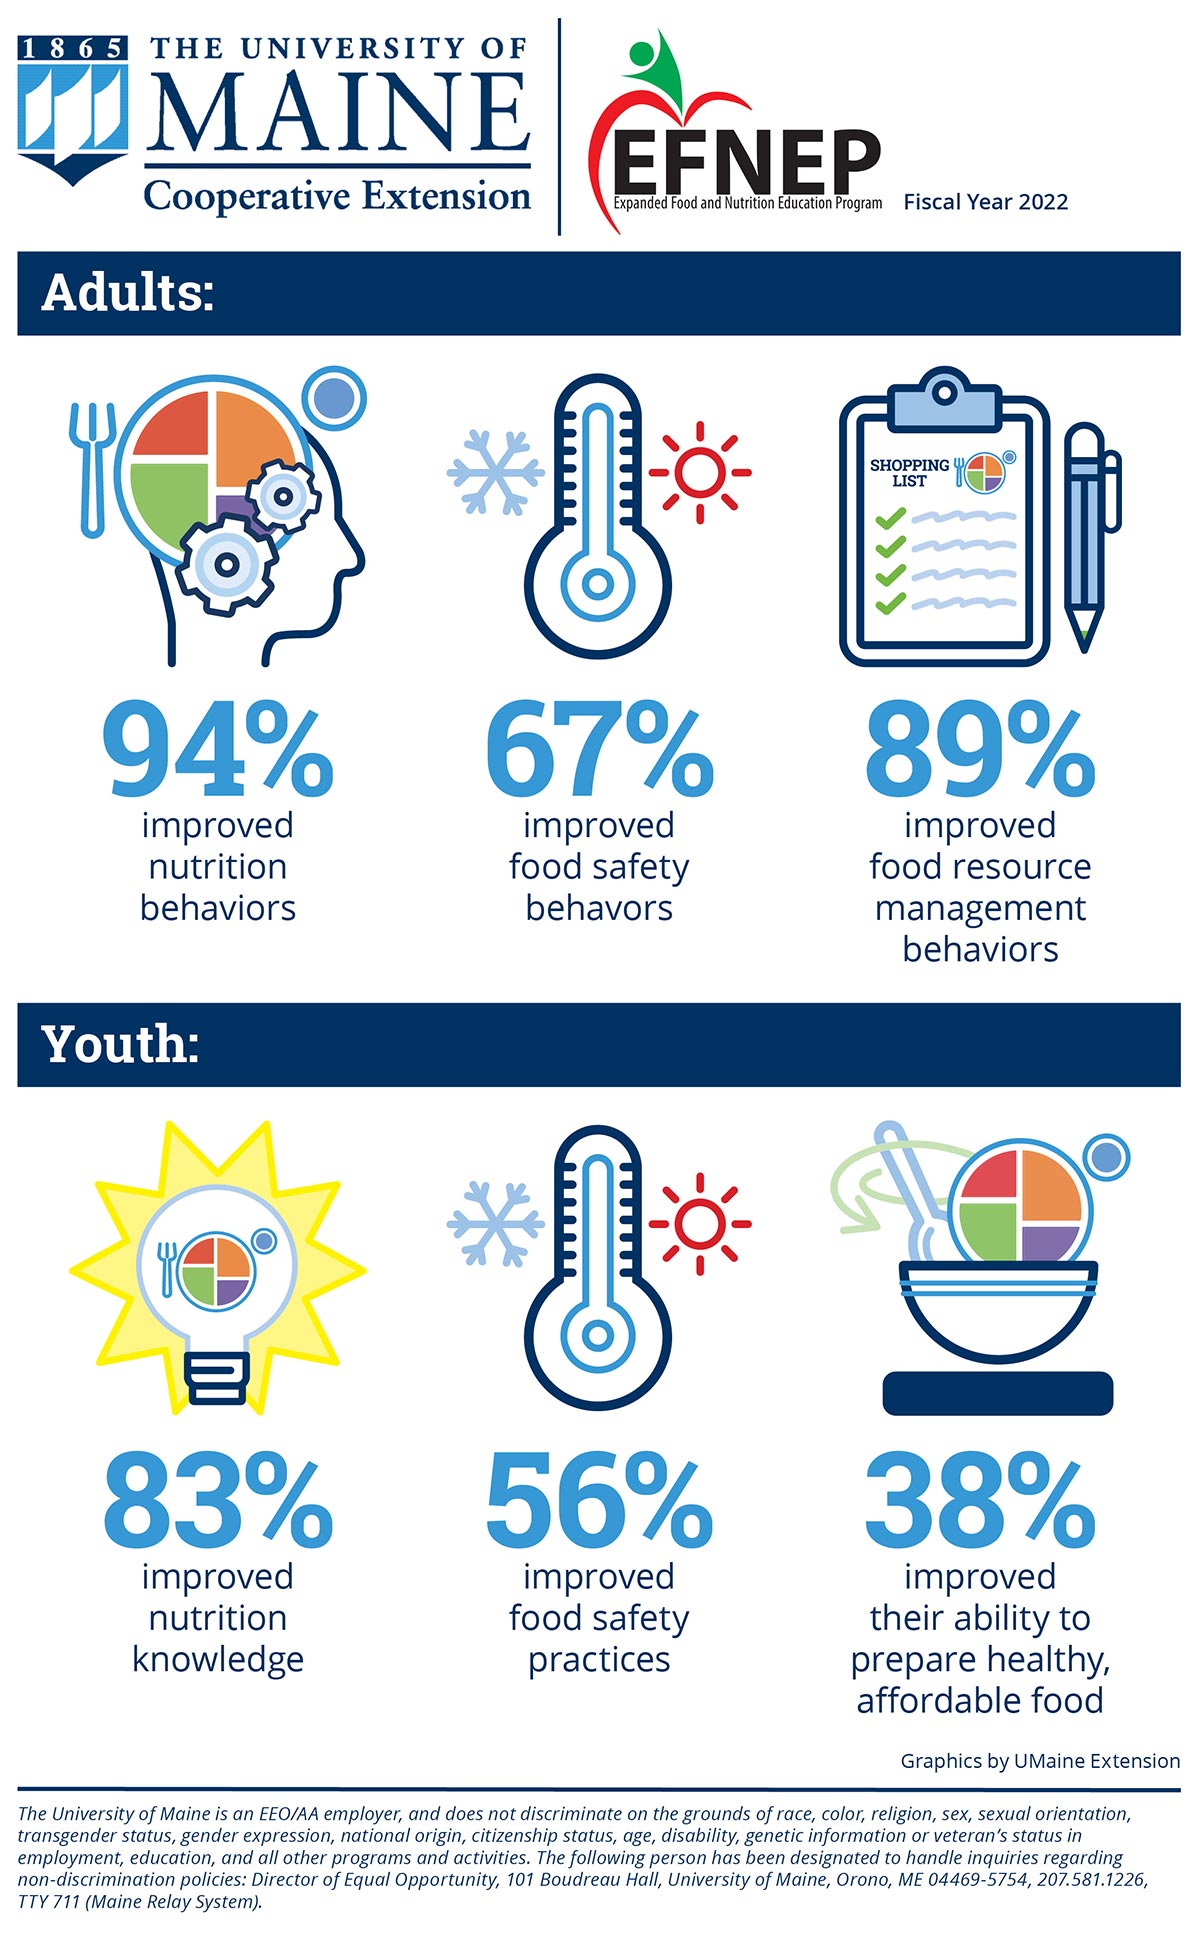 https://extension.umaine.edu/food-health/wp-content/uploads/sites/9/2022/11/FY-2022-EFNEP-adult-youth-infographic_ms.jpg